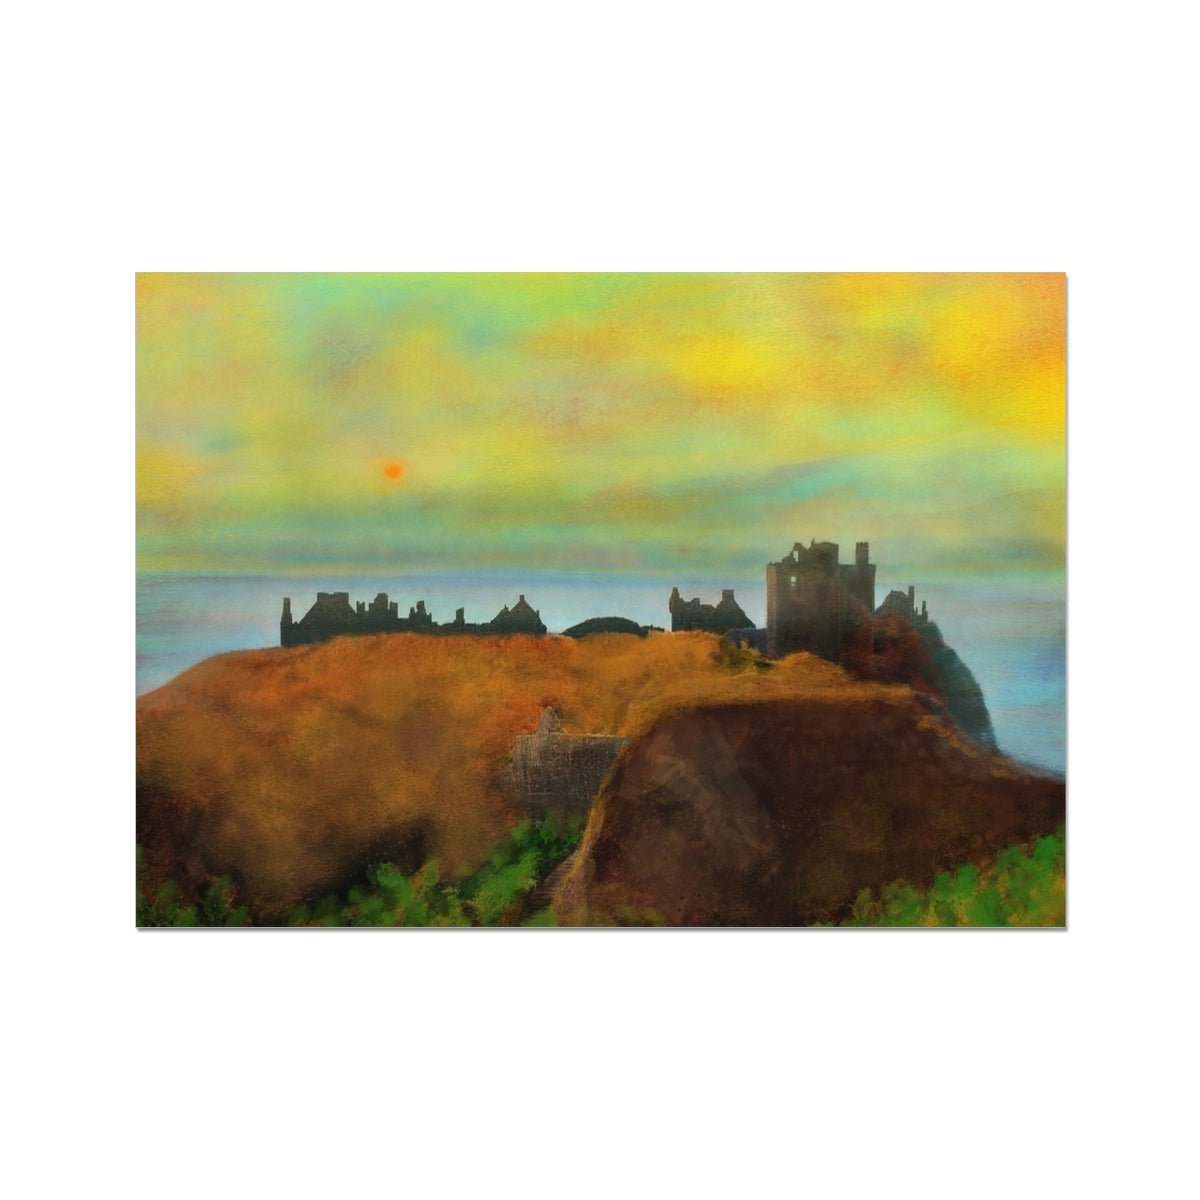 Dunnottar Castle Dusk Painting | Fine Art Prints From Scotland-Unframed Prints-Historic & Iconic Scotland Art Gallery-A2 Landscape-Paintings, Prints, Homeware, Art Gifts From Scotland By Scottish Artist Kevin Hunter